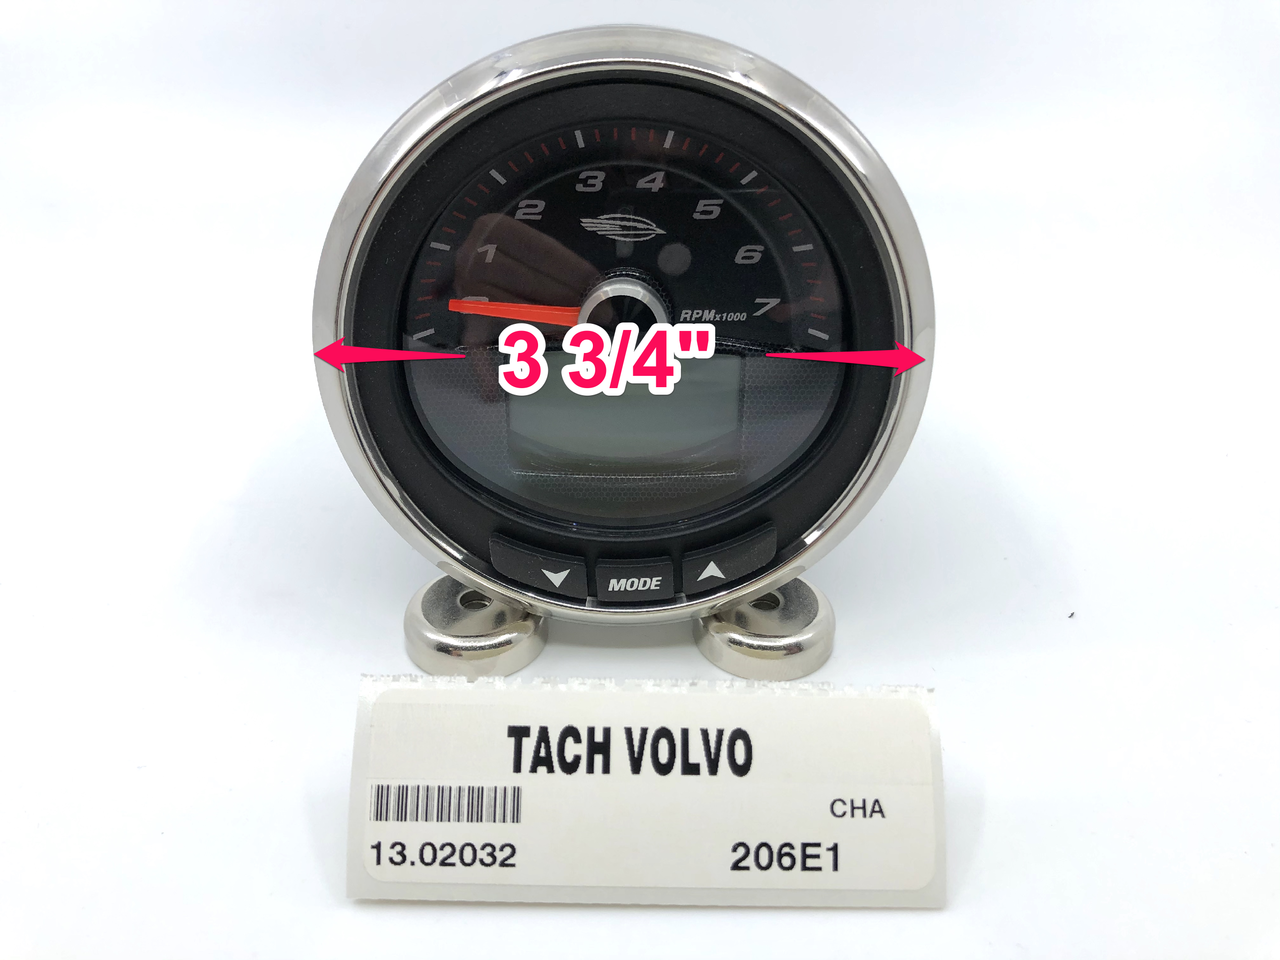 TACHOMETER WITH LED DISPLAY 13.02032 *In Stock & Ready To Ship!